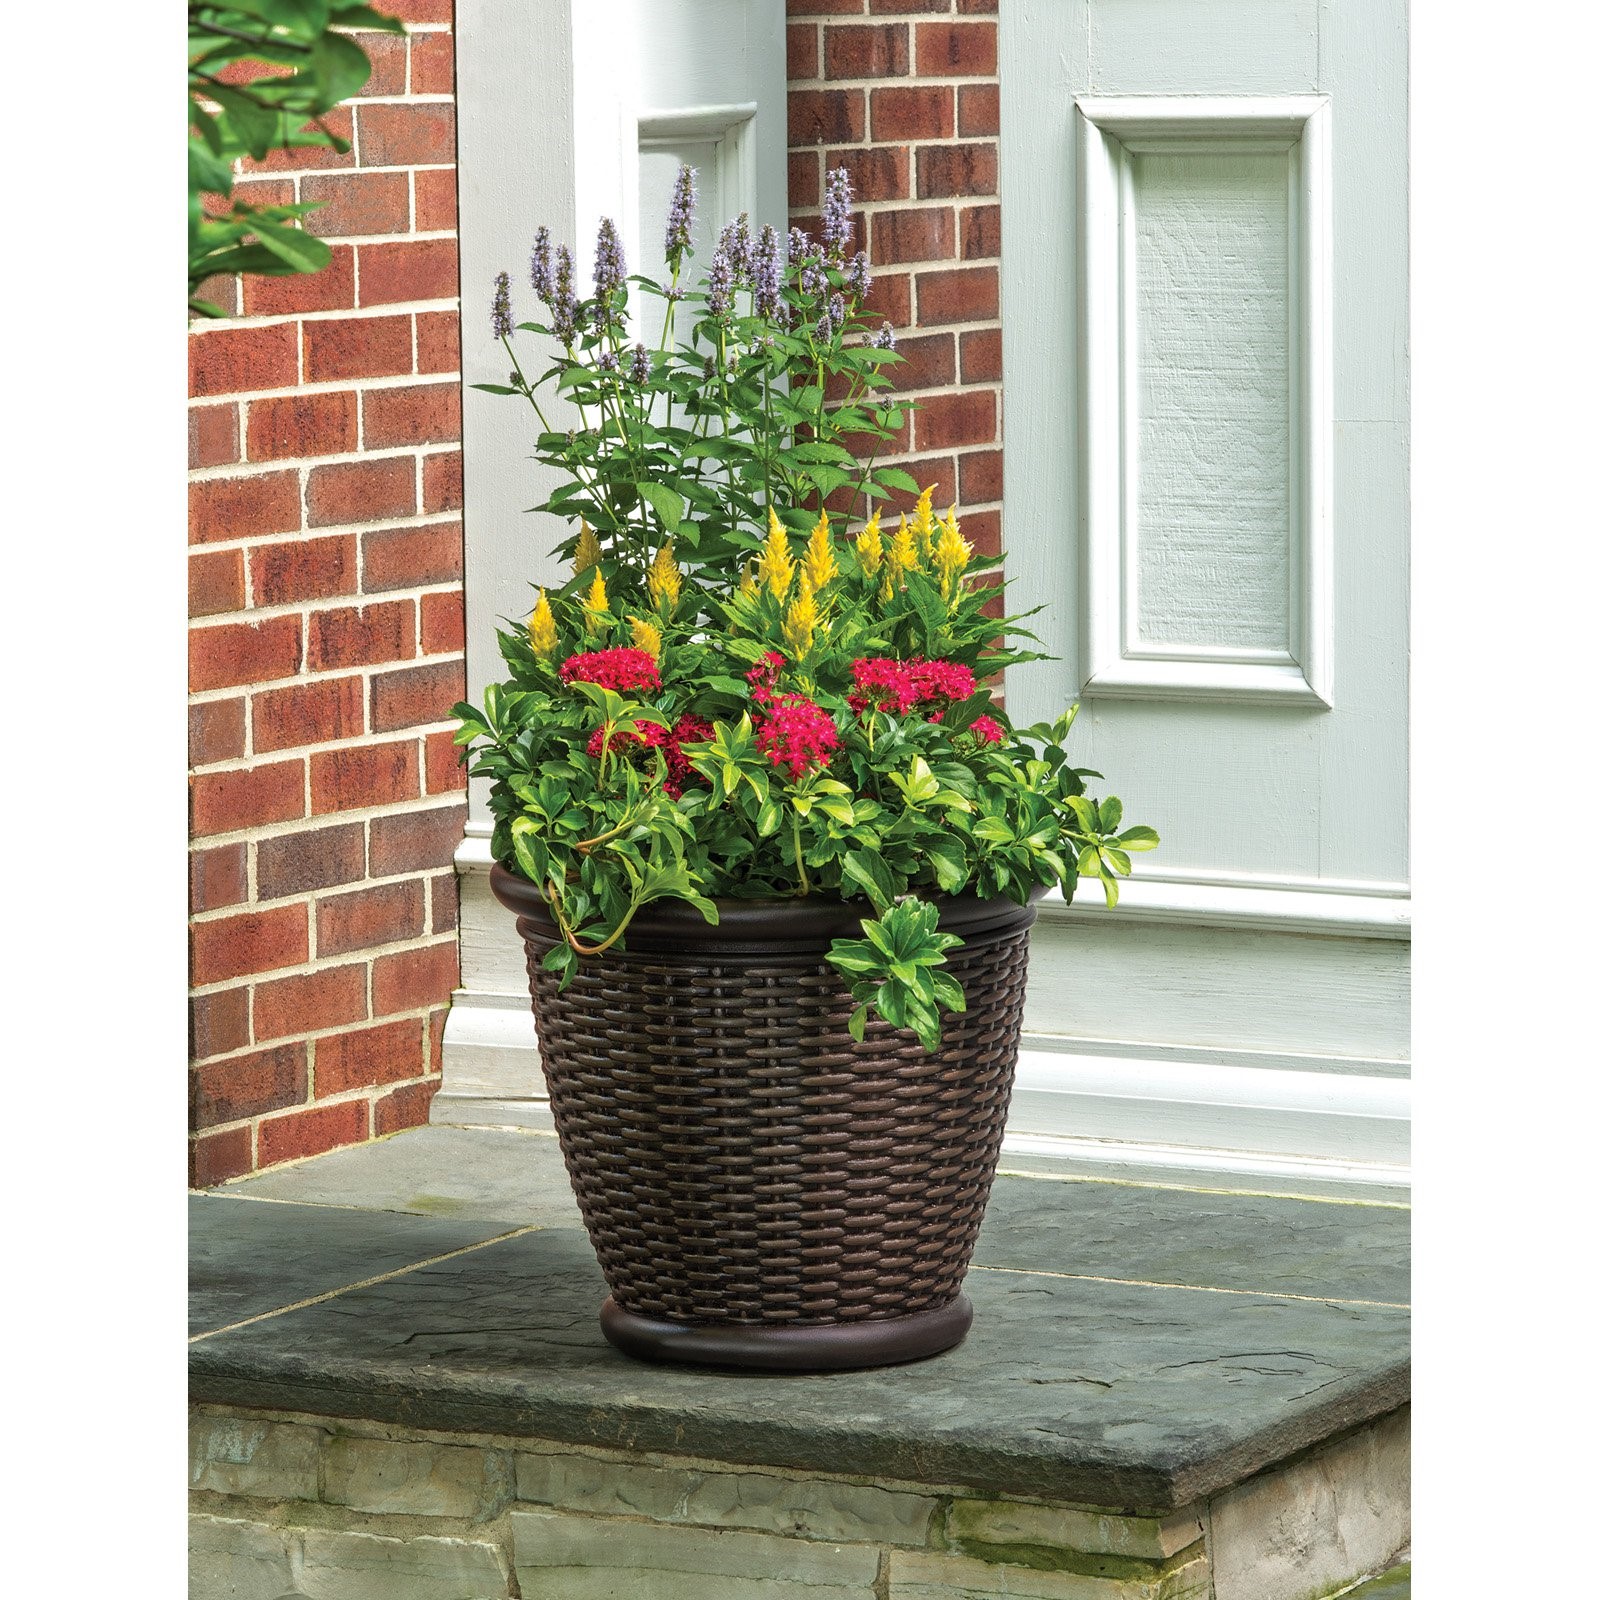 Better Homes & Gardens 18 in. Faux Wicker Resin Planter Pot, Java Brown - image 2 of 2